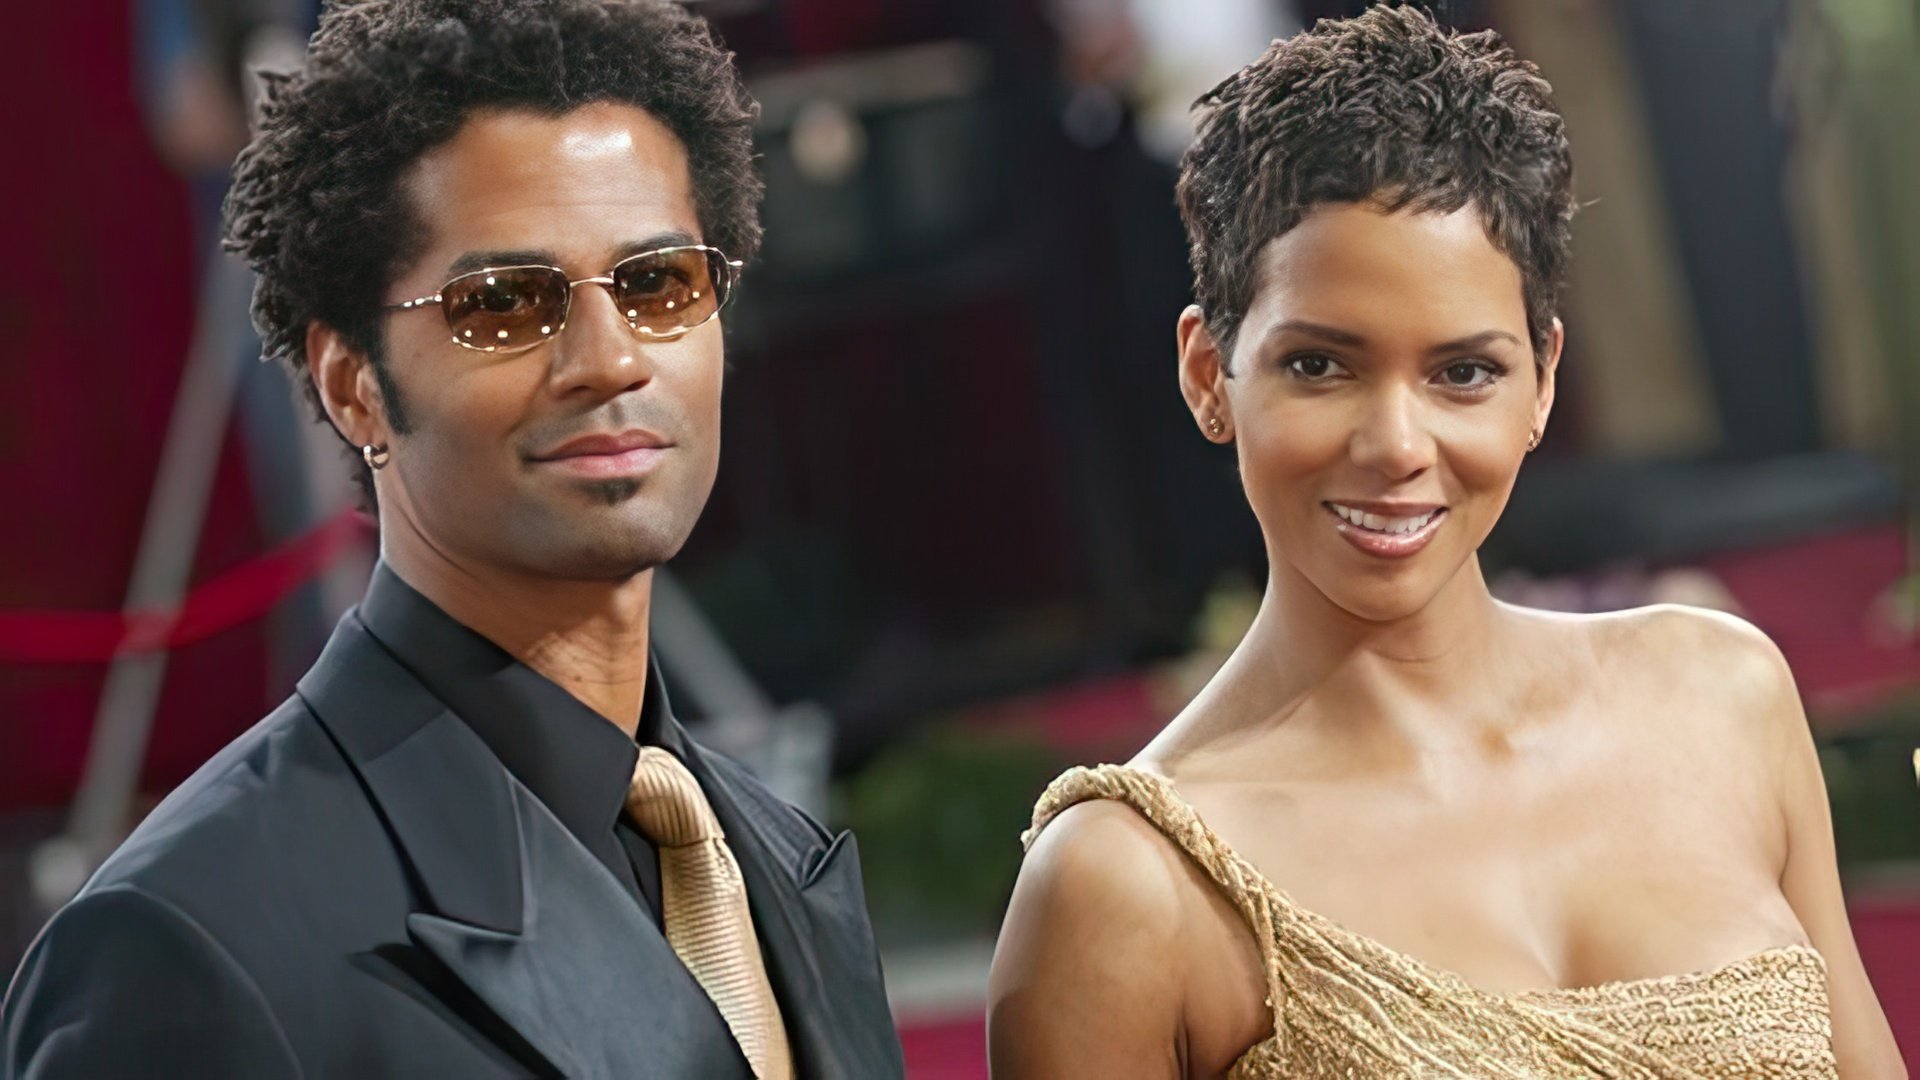 Halle Berry and Eric Benet